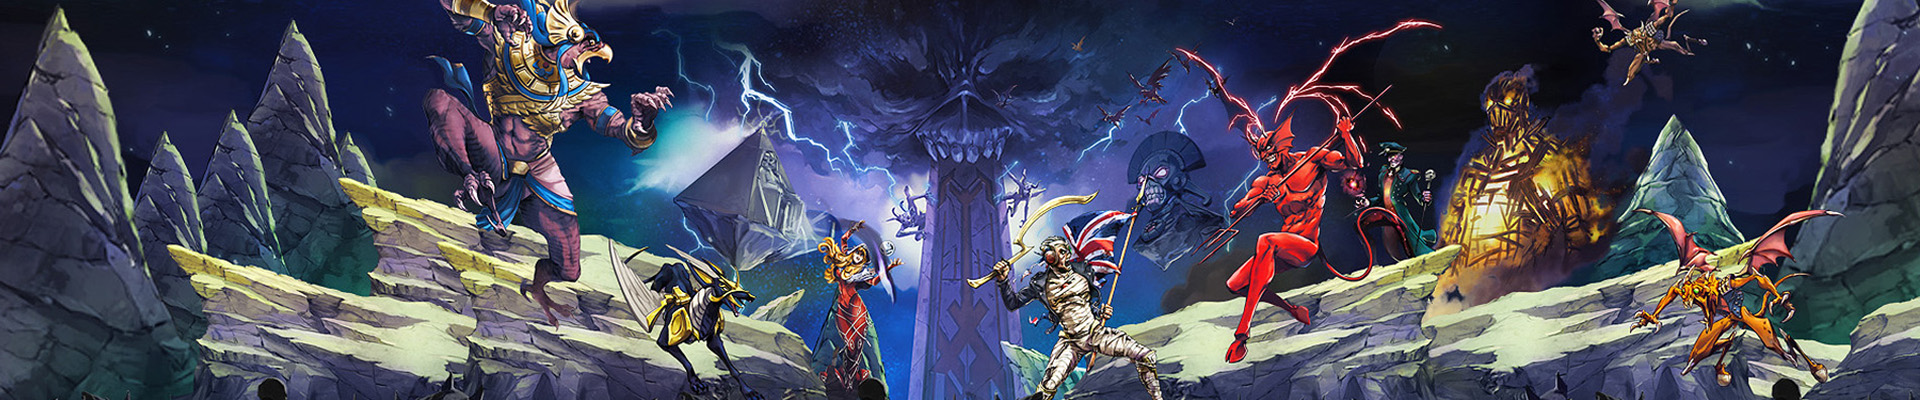 IRON MAIDEN, ROADHOUSE INTERACTIVE, AND 50CC GAMES ANNOUNCE MOBILE RPG 'LEGACY OF THE BEAST'